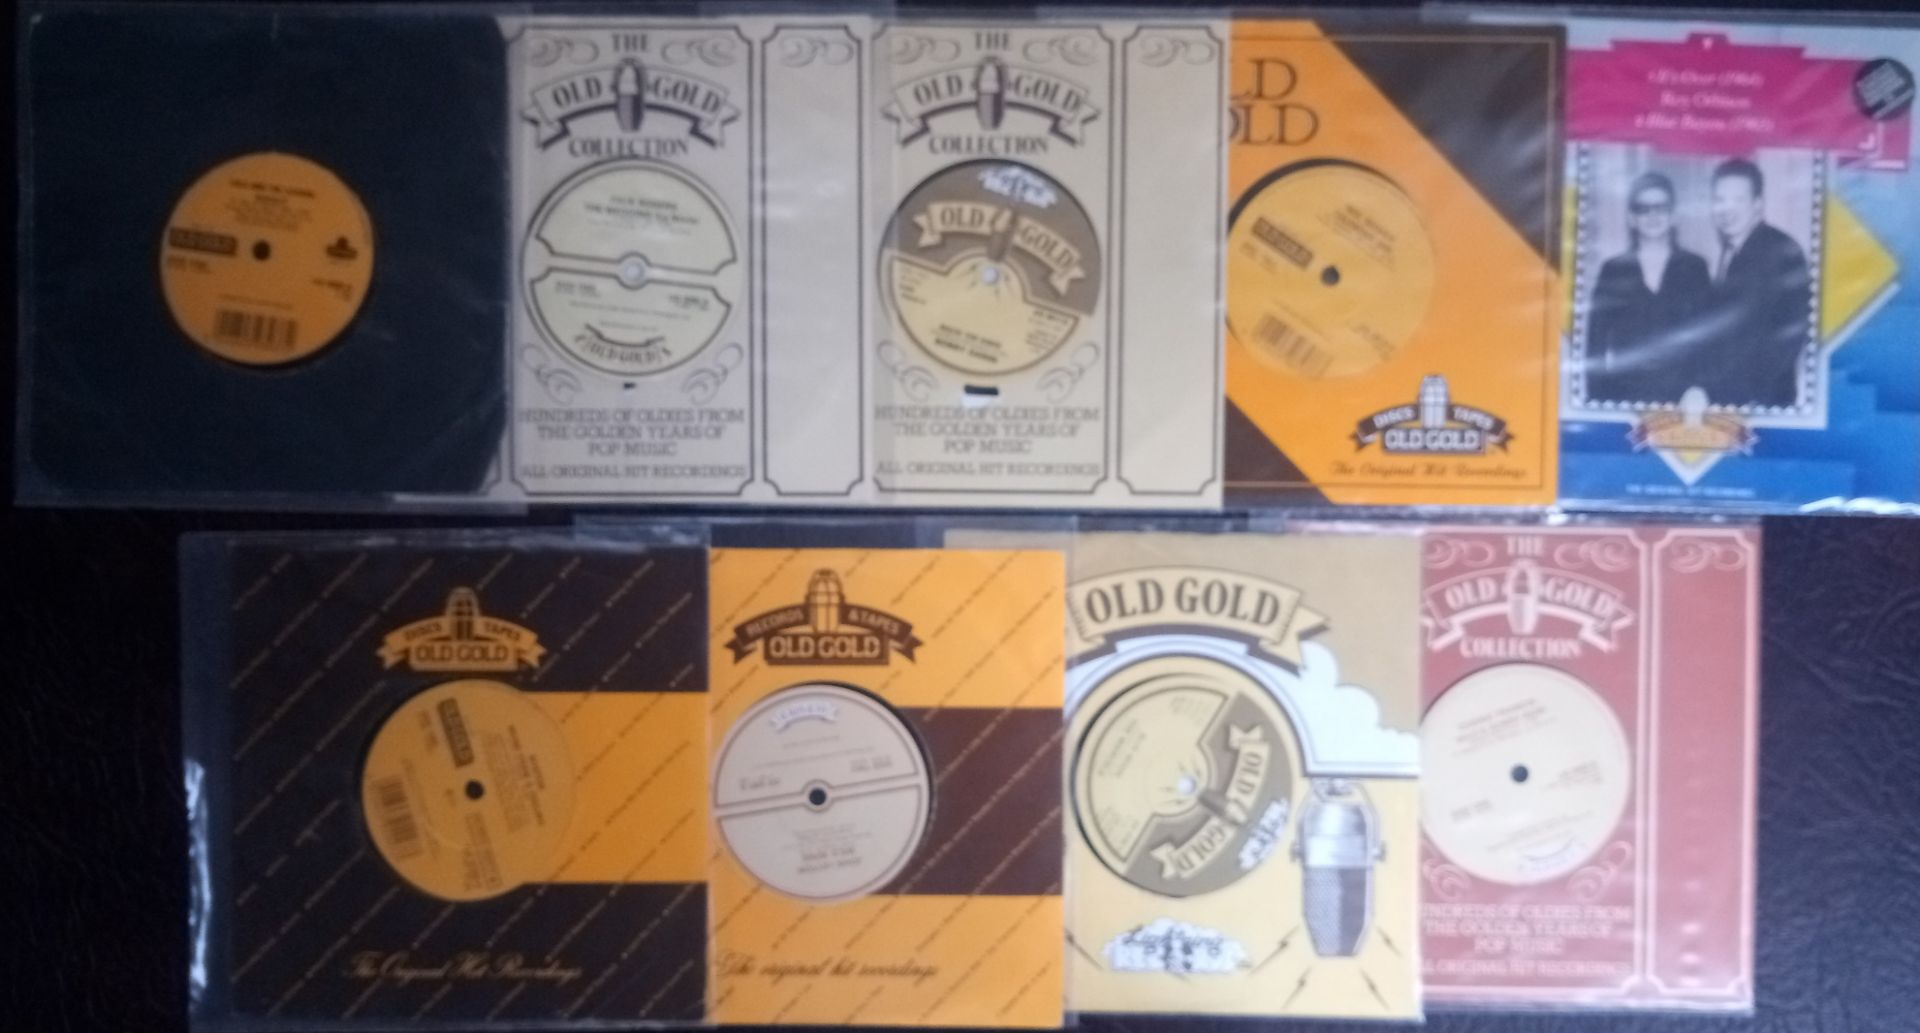 A collection of 19 x old gold 7" vinyl records.